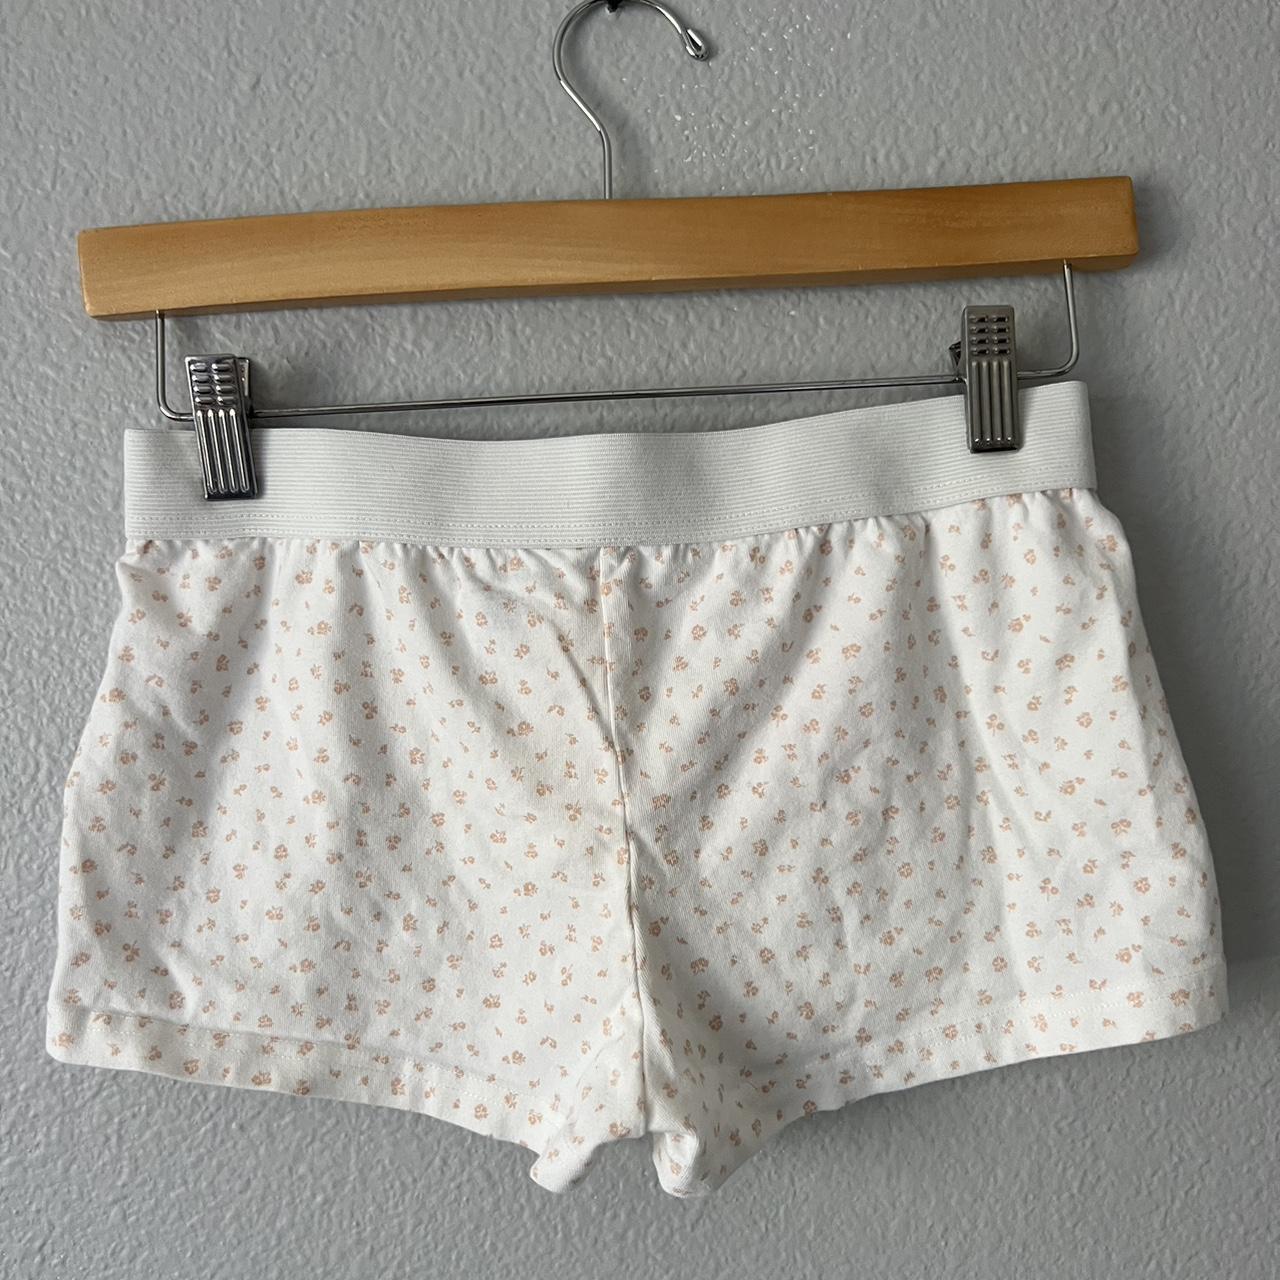 Brandy Melville Women's White and Pink Shorts (2)